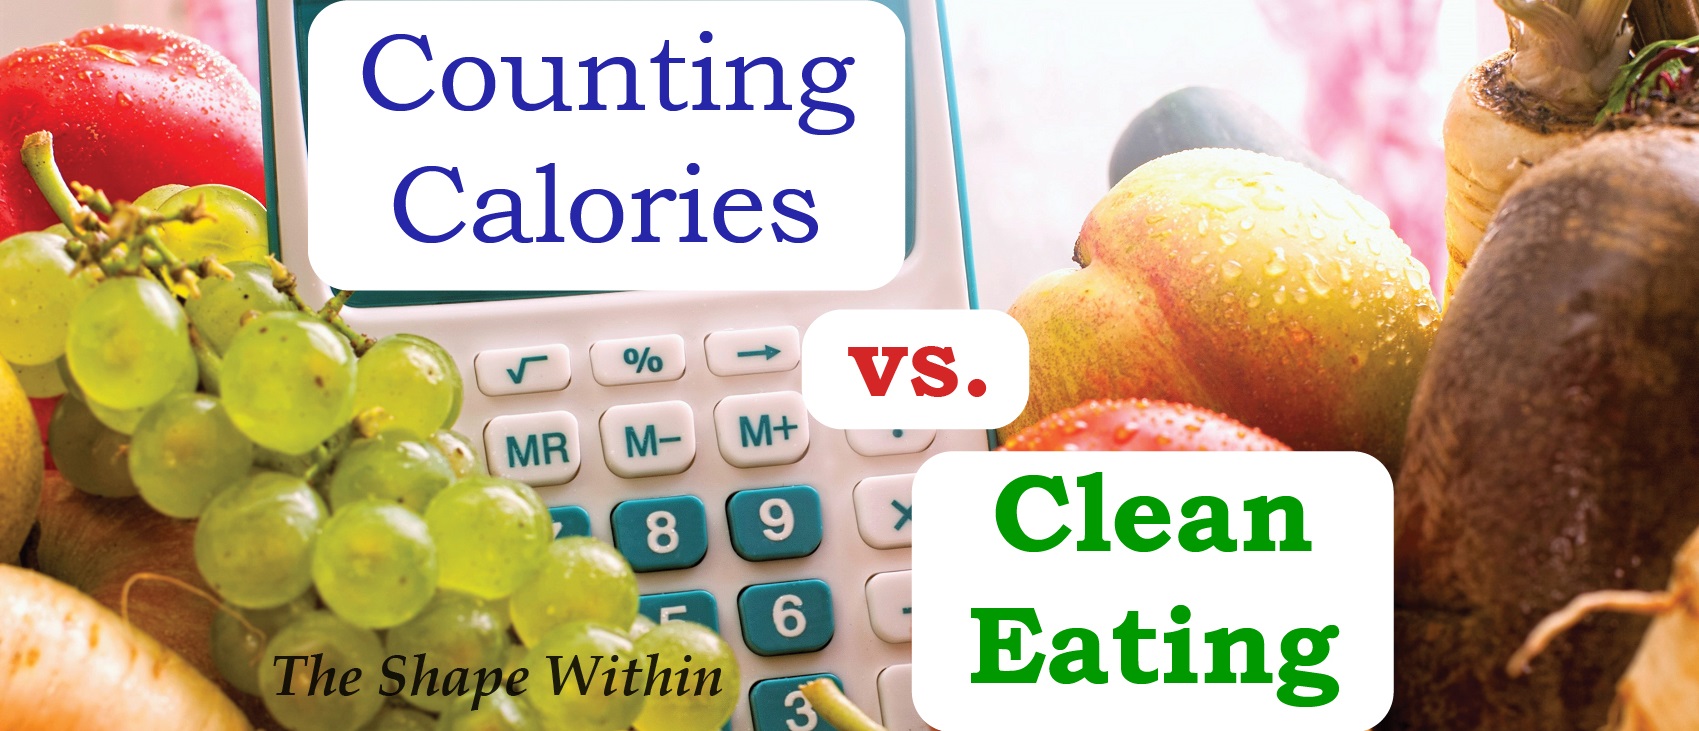 Clean eating is better for weight loss than counting calories